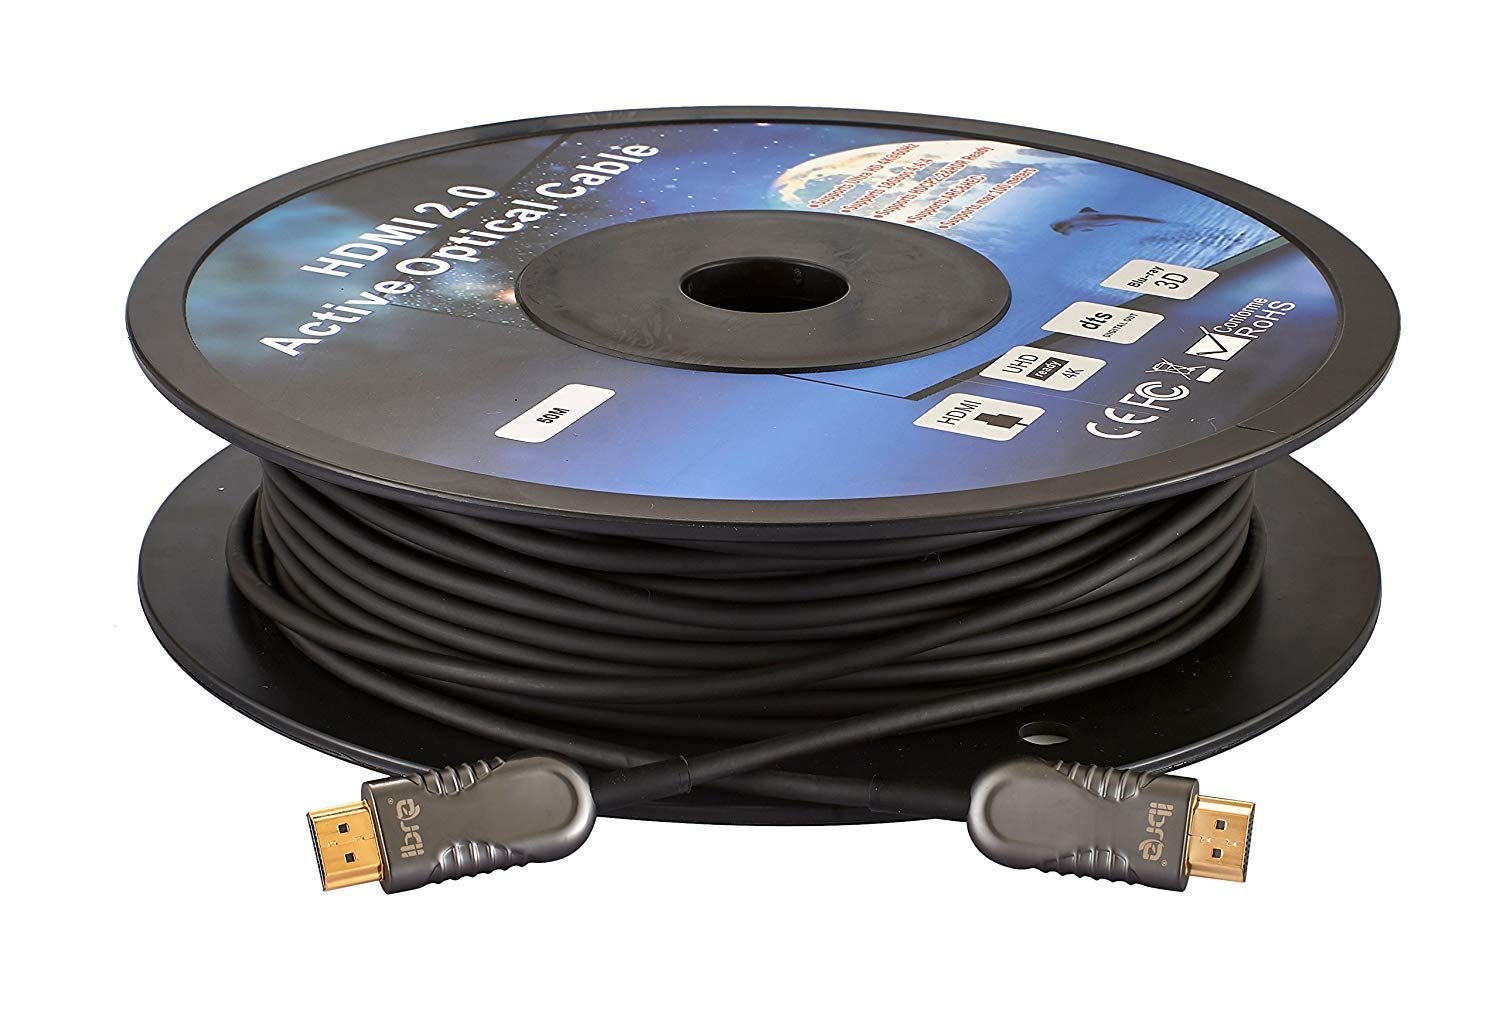 7M Fiber Optic HDMI High Speed Cable v2.0 18Gbps HDMI Lead Support 4K@60Hz/4:4:4/3D/4K HDR HDCP 2.2 for Apple TV, HDTV, Roku TV Box, Xbox One X, Home Theater, PS4, PS3 etc - IBRA OPTICAL HDMI Cable